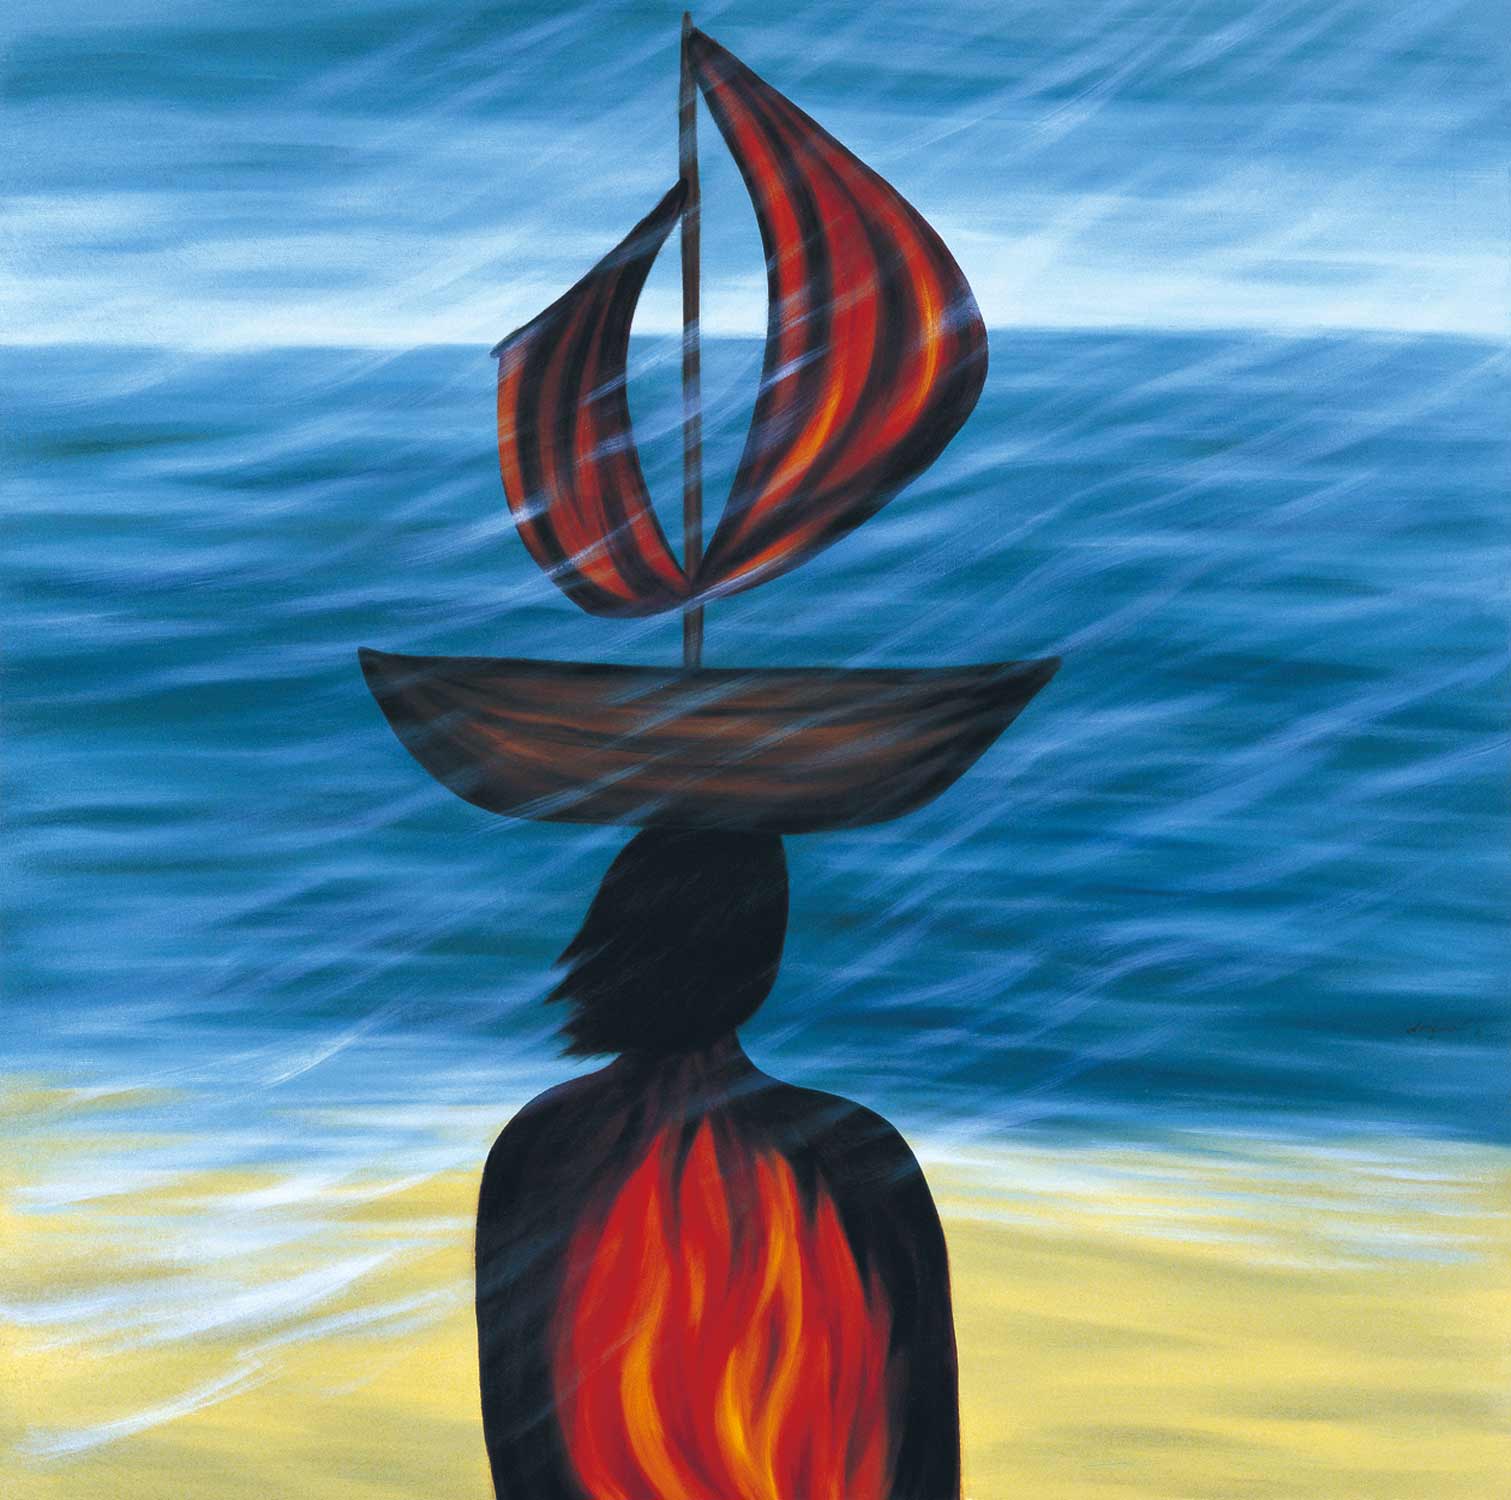 <em>By the Shore</em>, 1992. Oil on linen, 48 x 48 in. (122 x 122 cm)